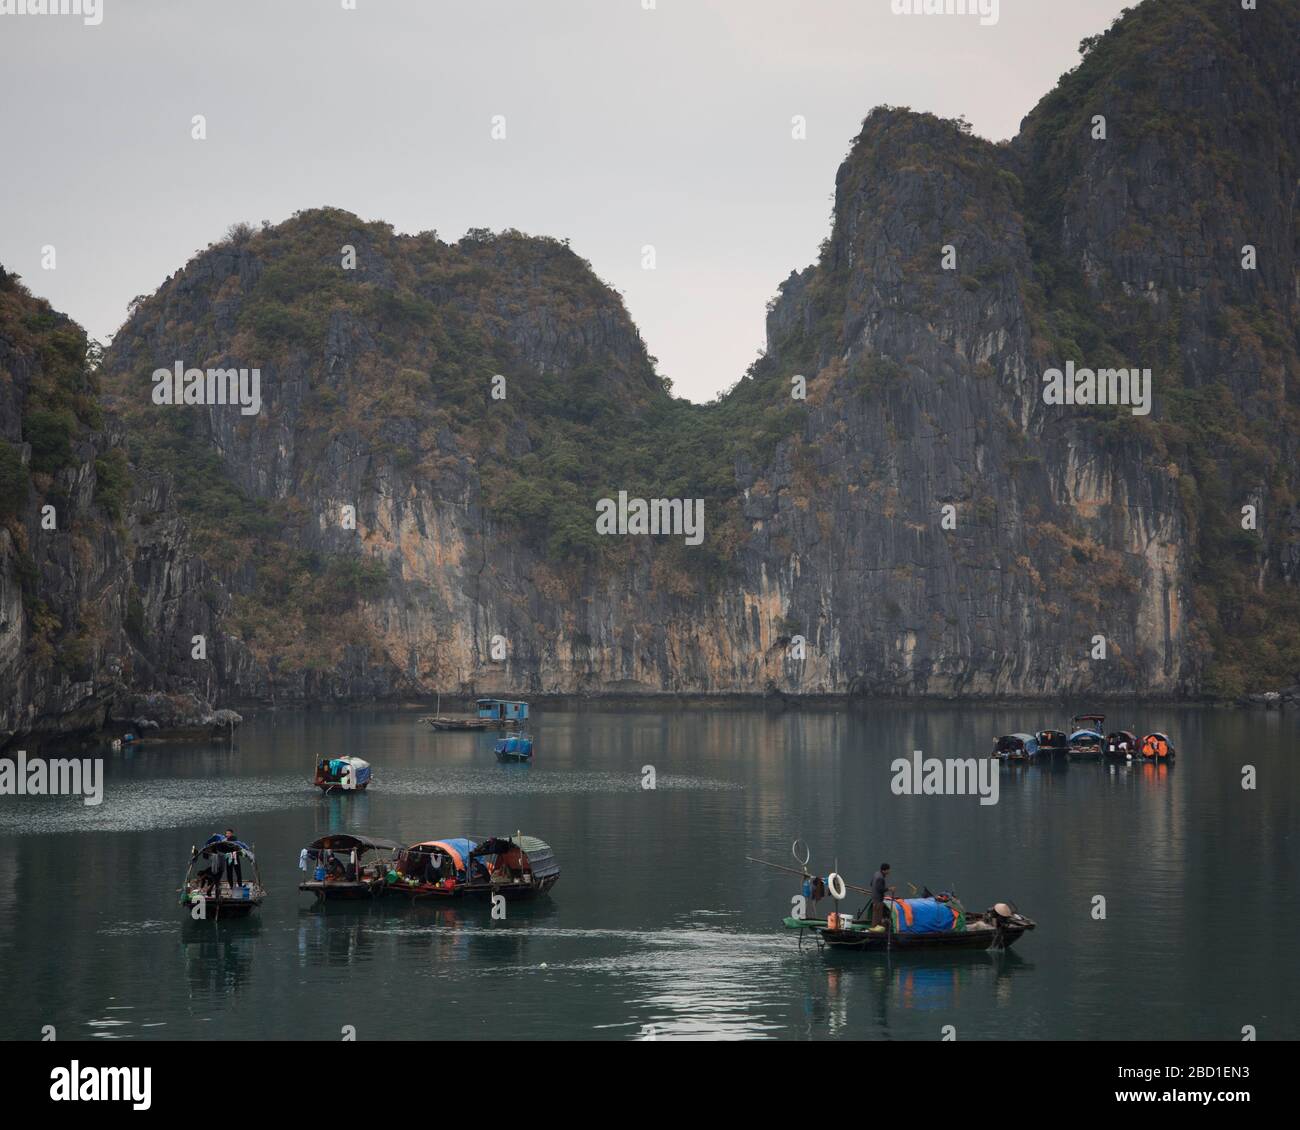 An Early morning view of Ha Long Bay with local fishing boats among the Limestone cliff formations, Stock Photo